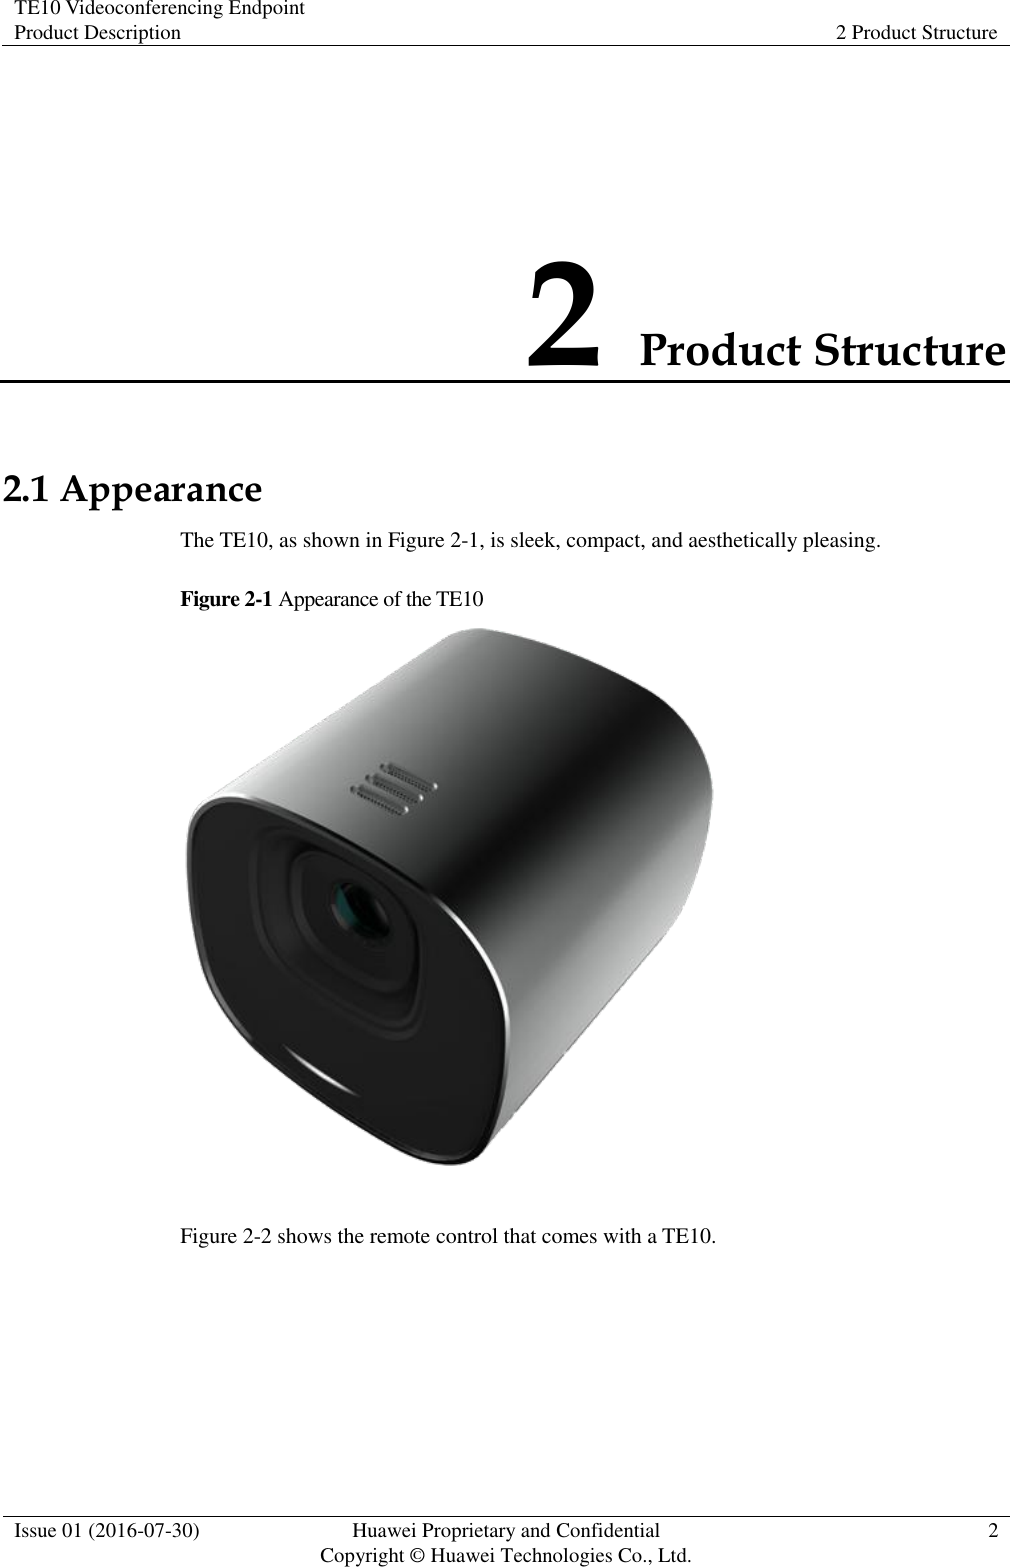 TE10 Videoconferencing Endpoint Product Description 2 Product Structure  Issue 01 (2016-07-30) Huawei Proprietary and Confidential                                     Copyright © Huawei Technologies Co., Ltd. 2  2 Product Structure 2.1 Appearance The TE10, as shown in Figure 2-1, is sleek, compact, and aesthetically pleasing. Figure 2-1 Appearance of the TE10   Figure 2-2 shows the remote control that comes with a TE10. 